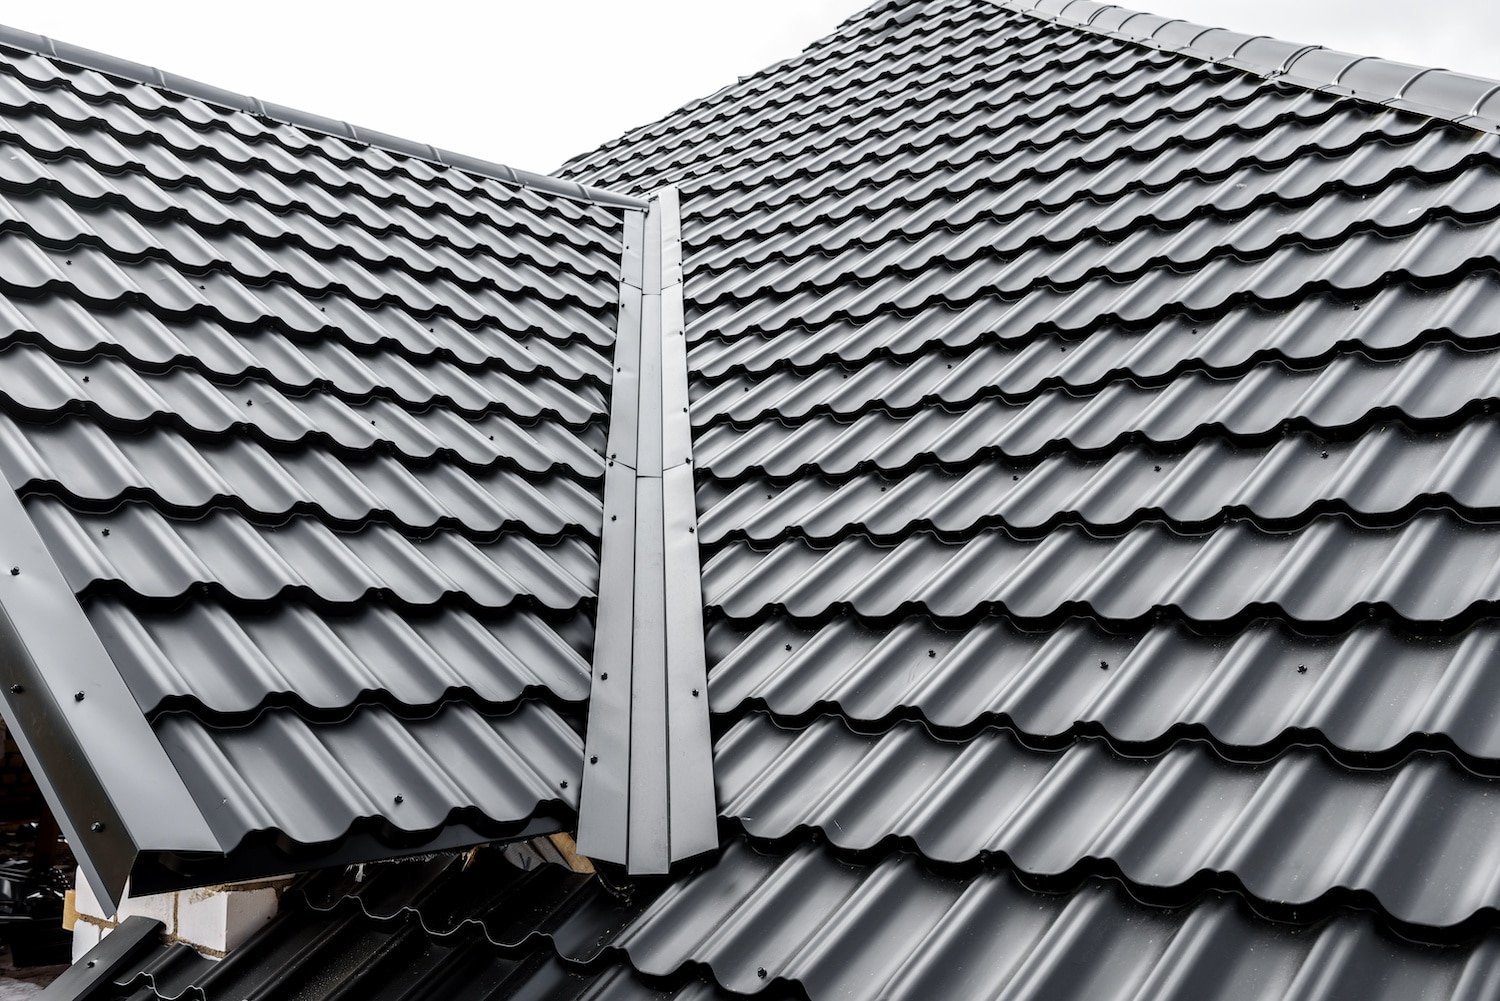 metal roof over shingles problems black metal roofing